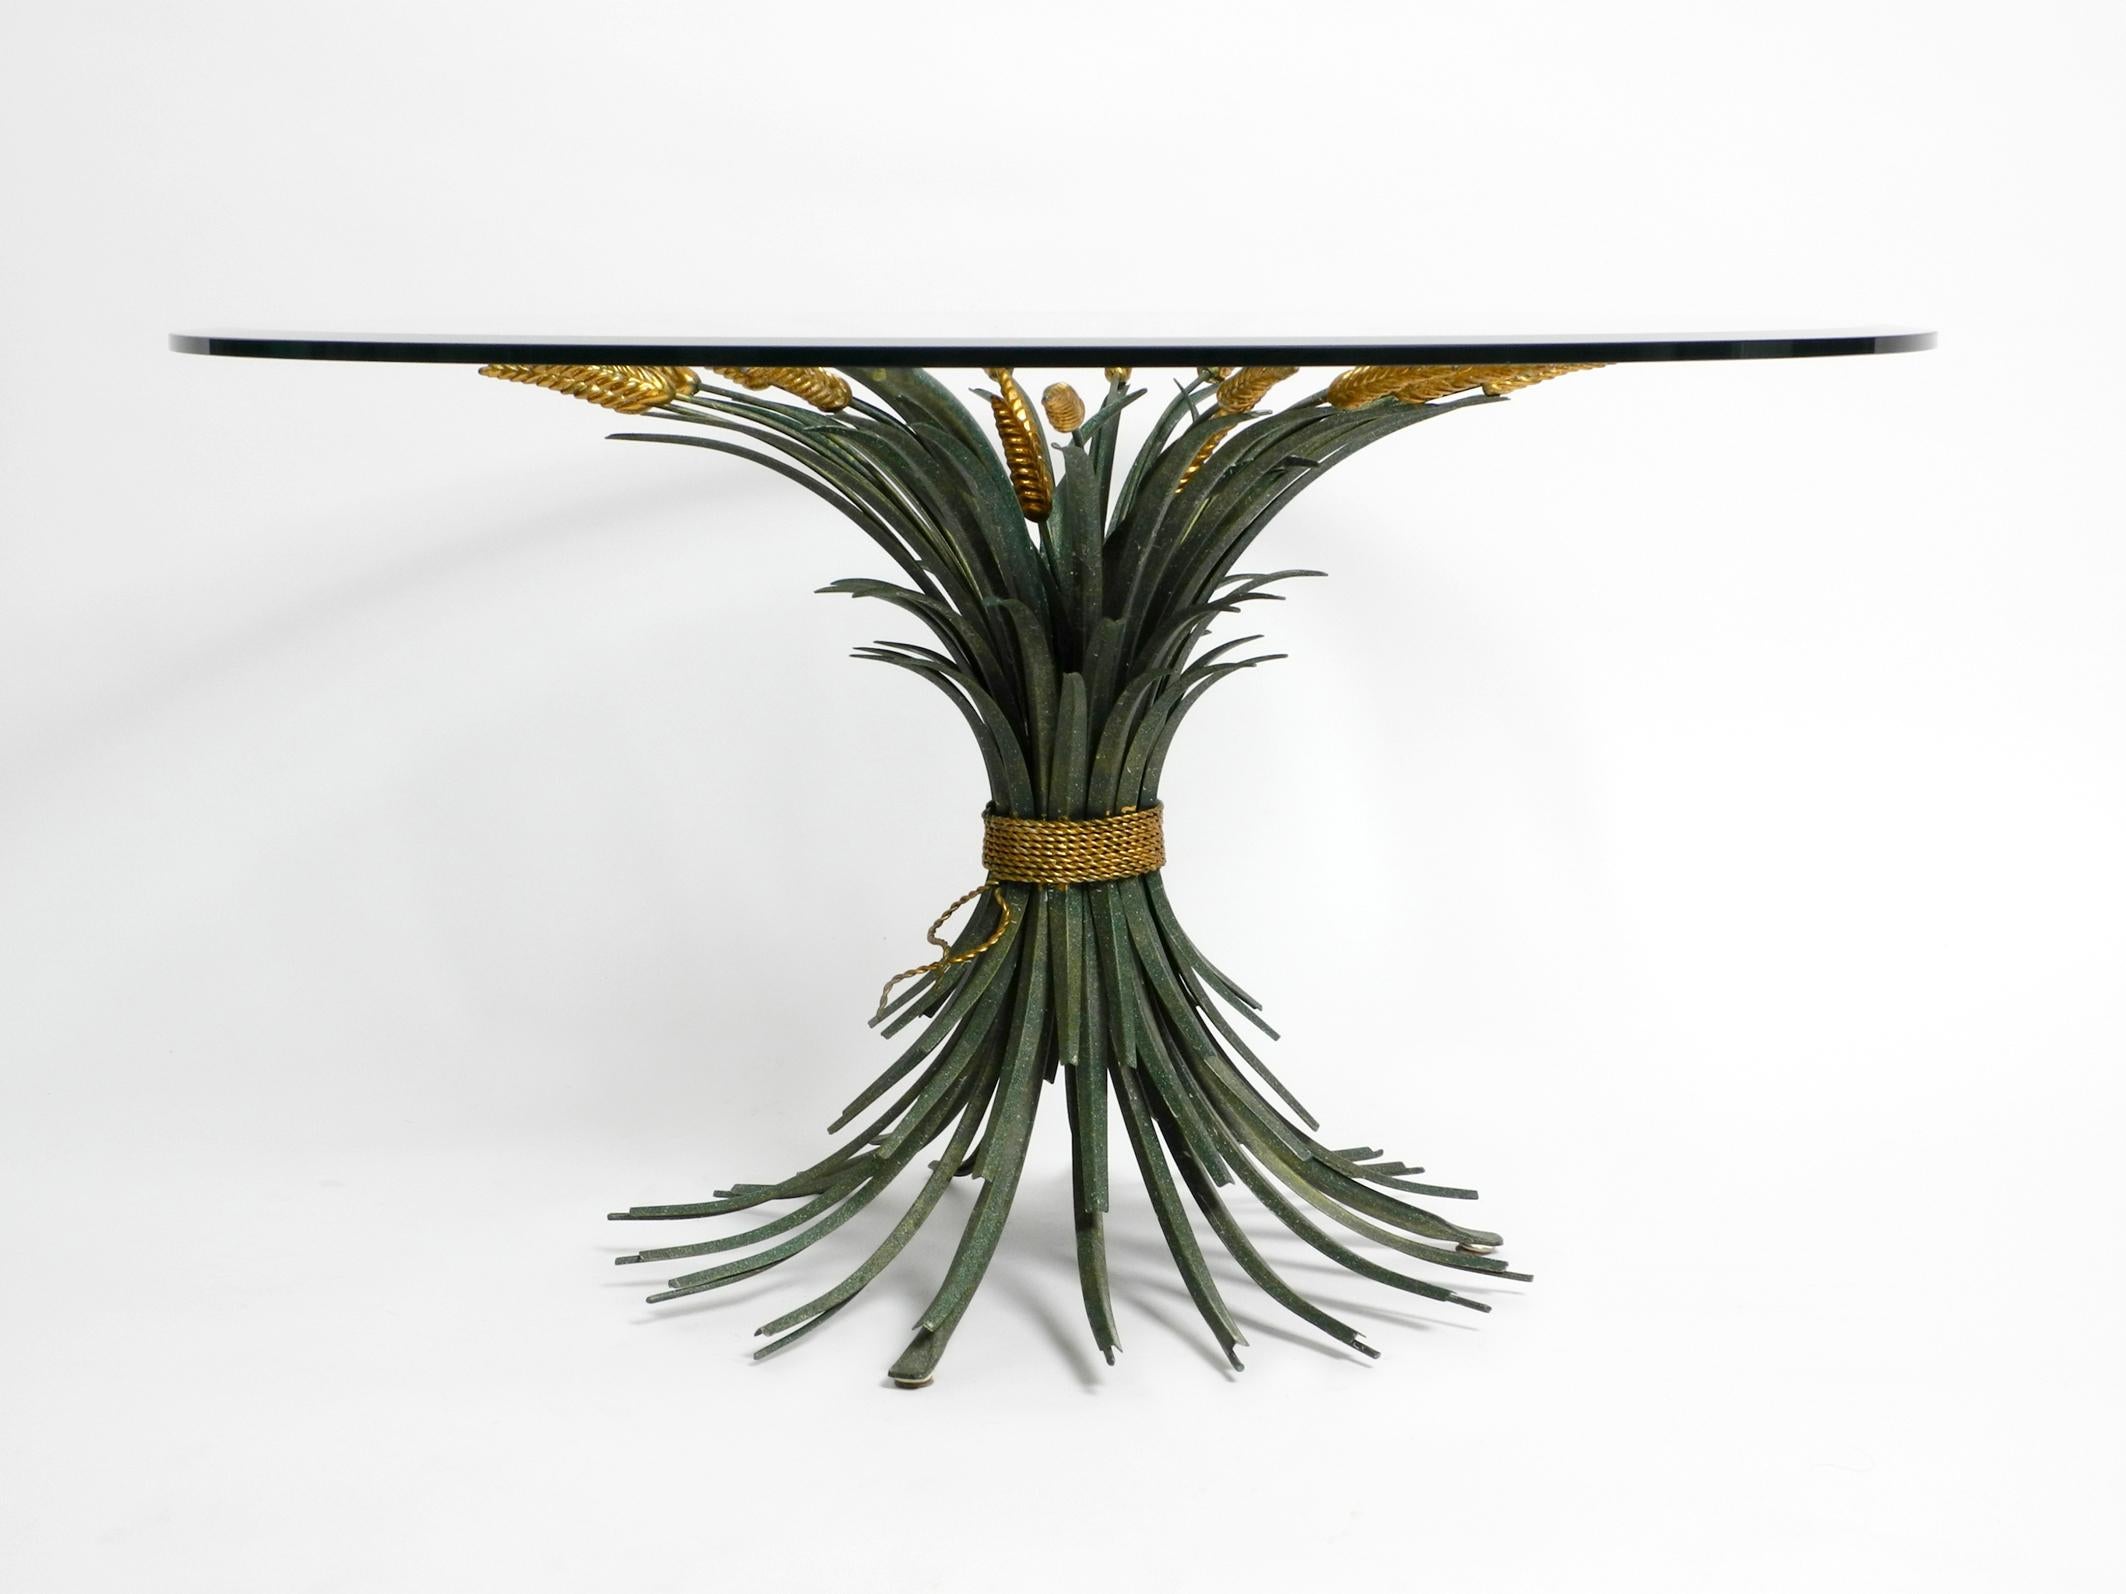 Beautiful 1970s large ears of wheat coffee table in green.
The wheat heads and the lacing in the middle are gold-plated.
Exceptional floral 1970s Hollywood Regency design in a very good vintage condition.
Frame is made entirely of metal, green